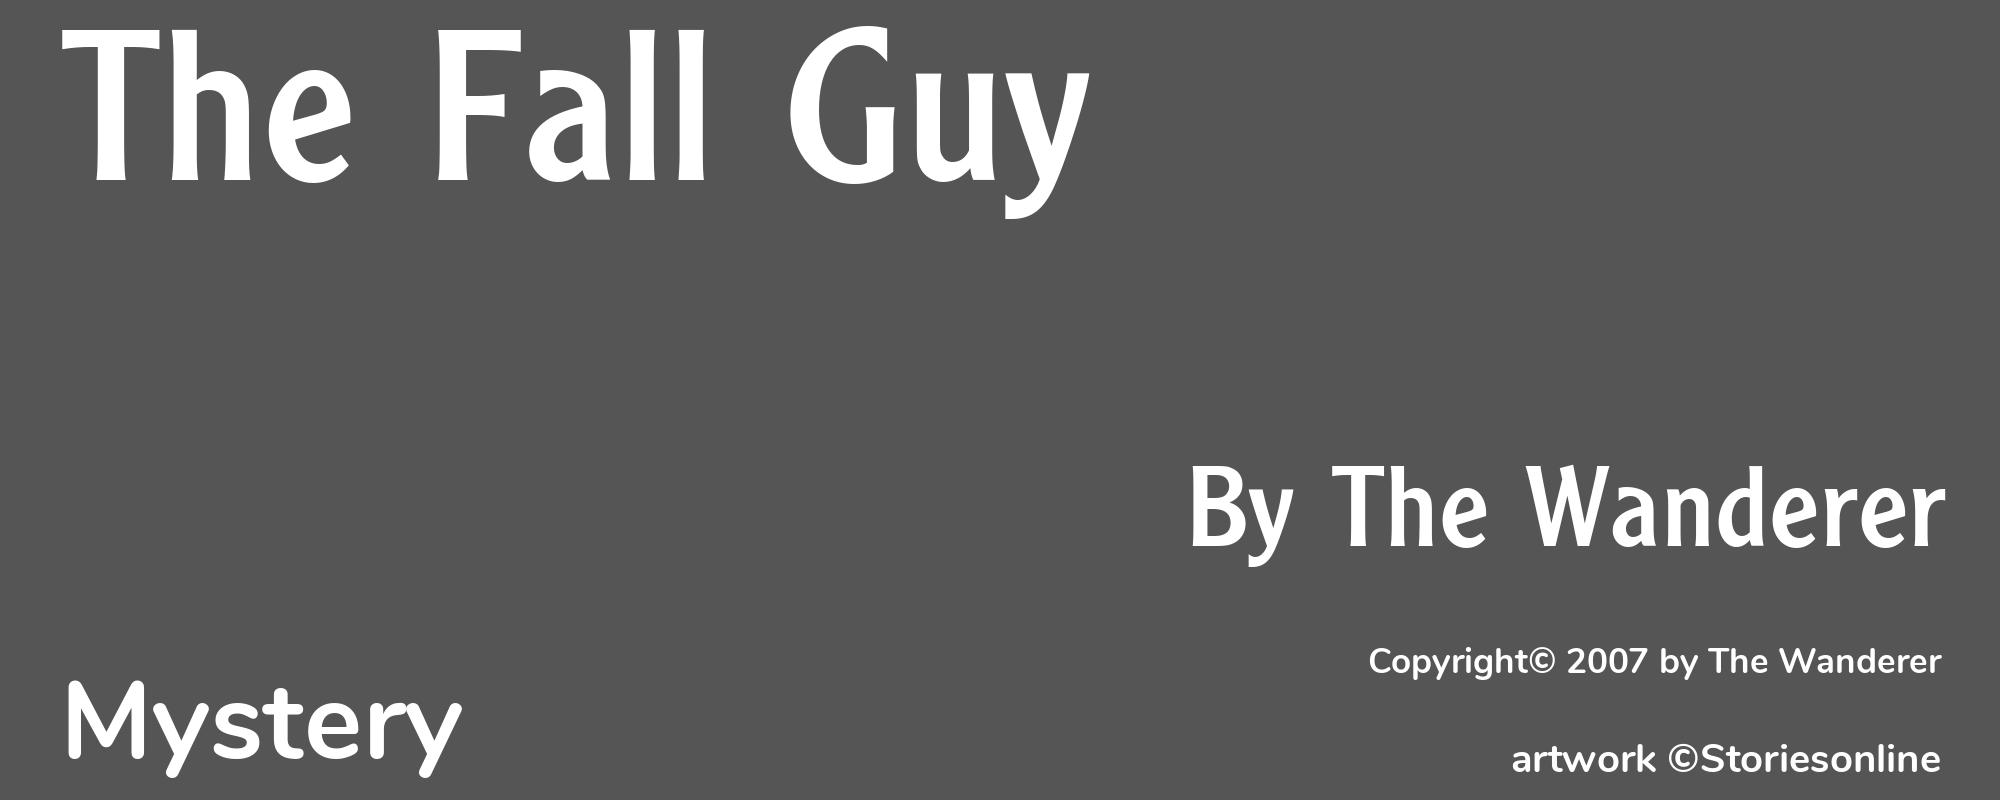 The Fall Guy - Cover